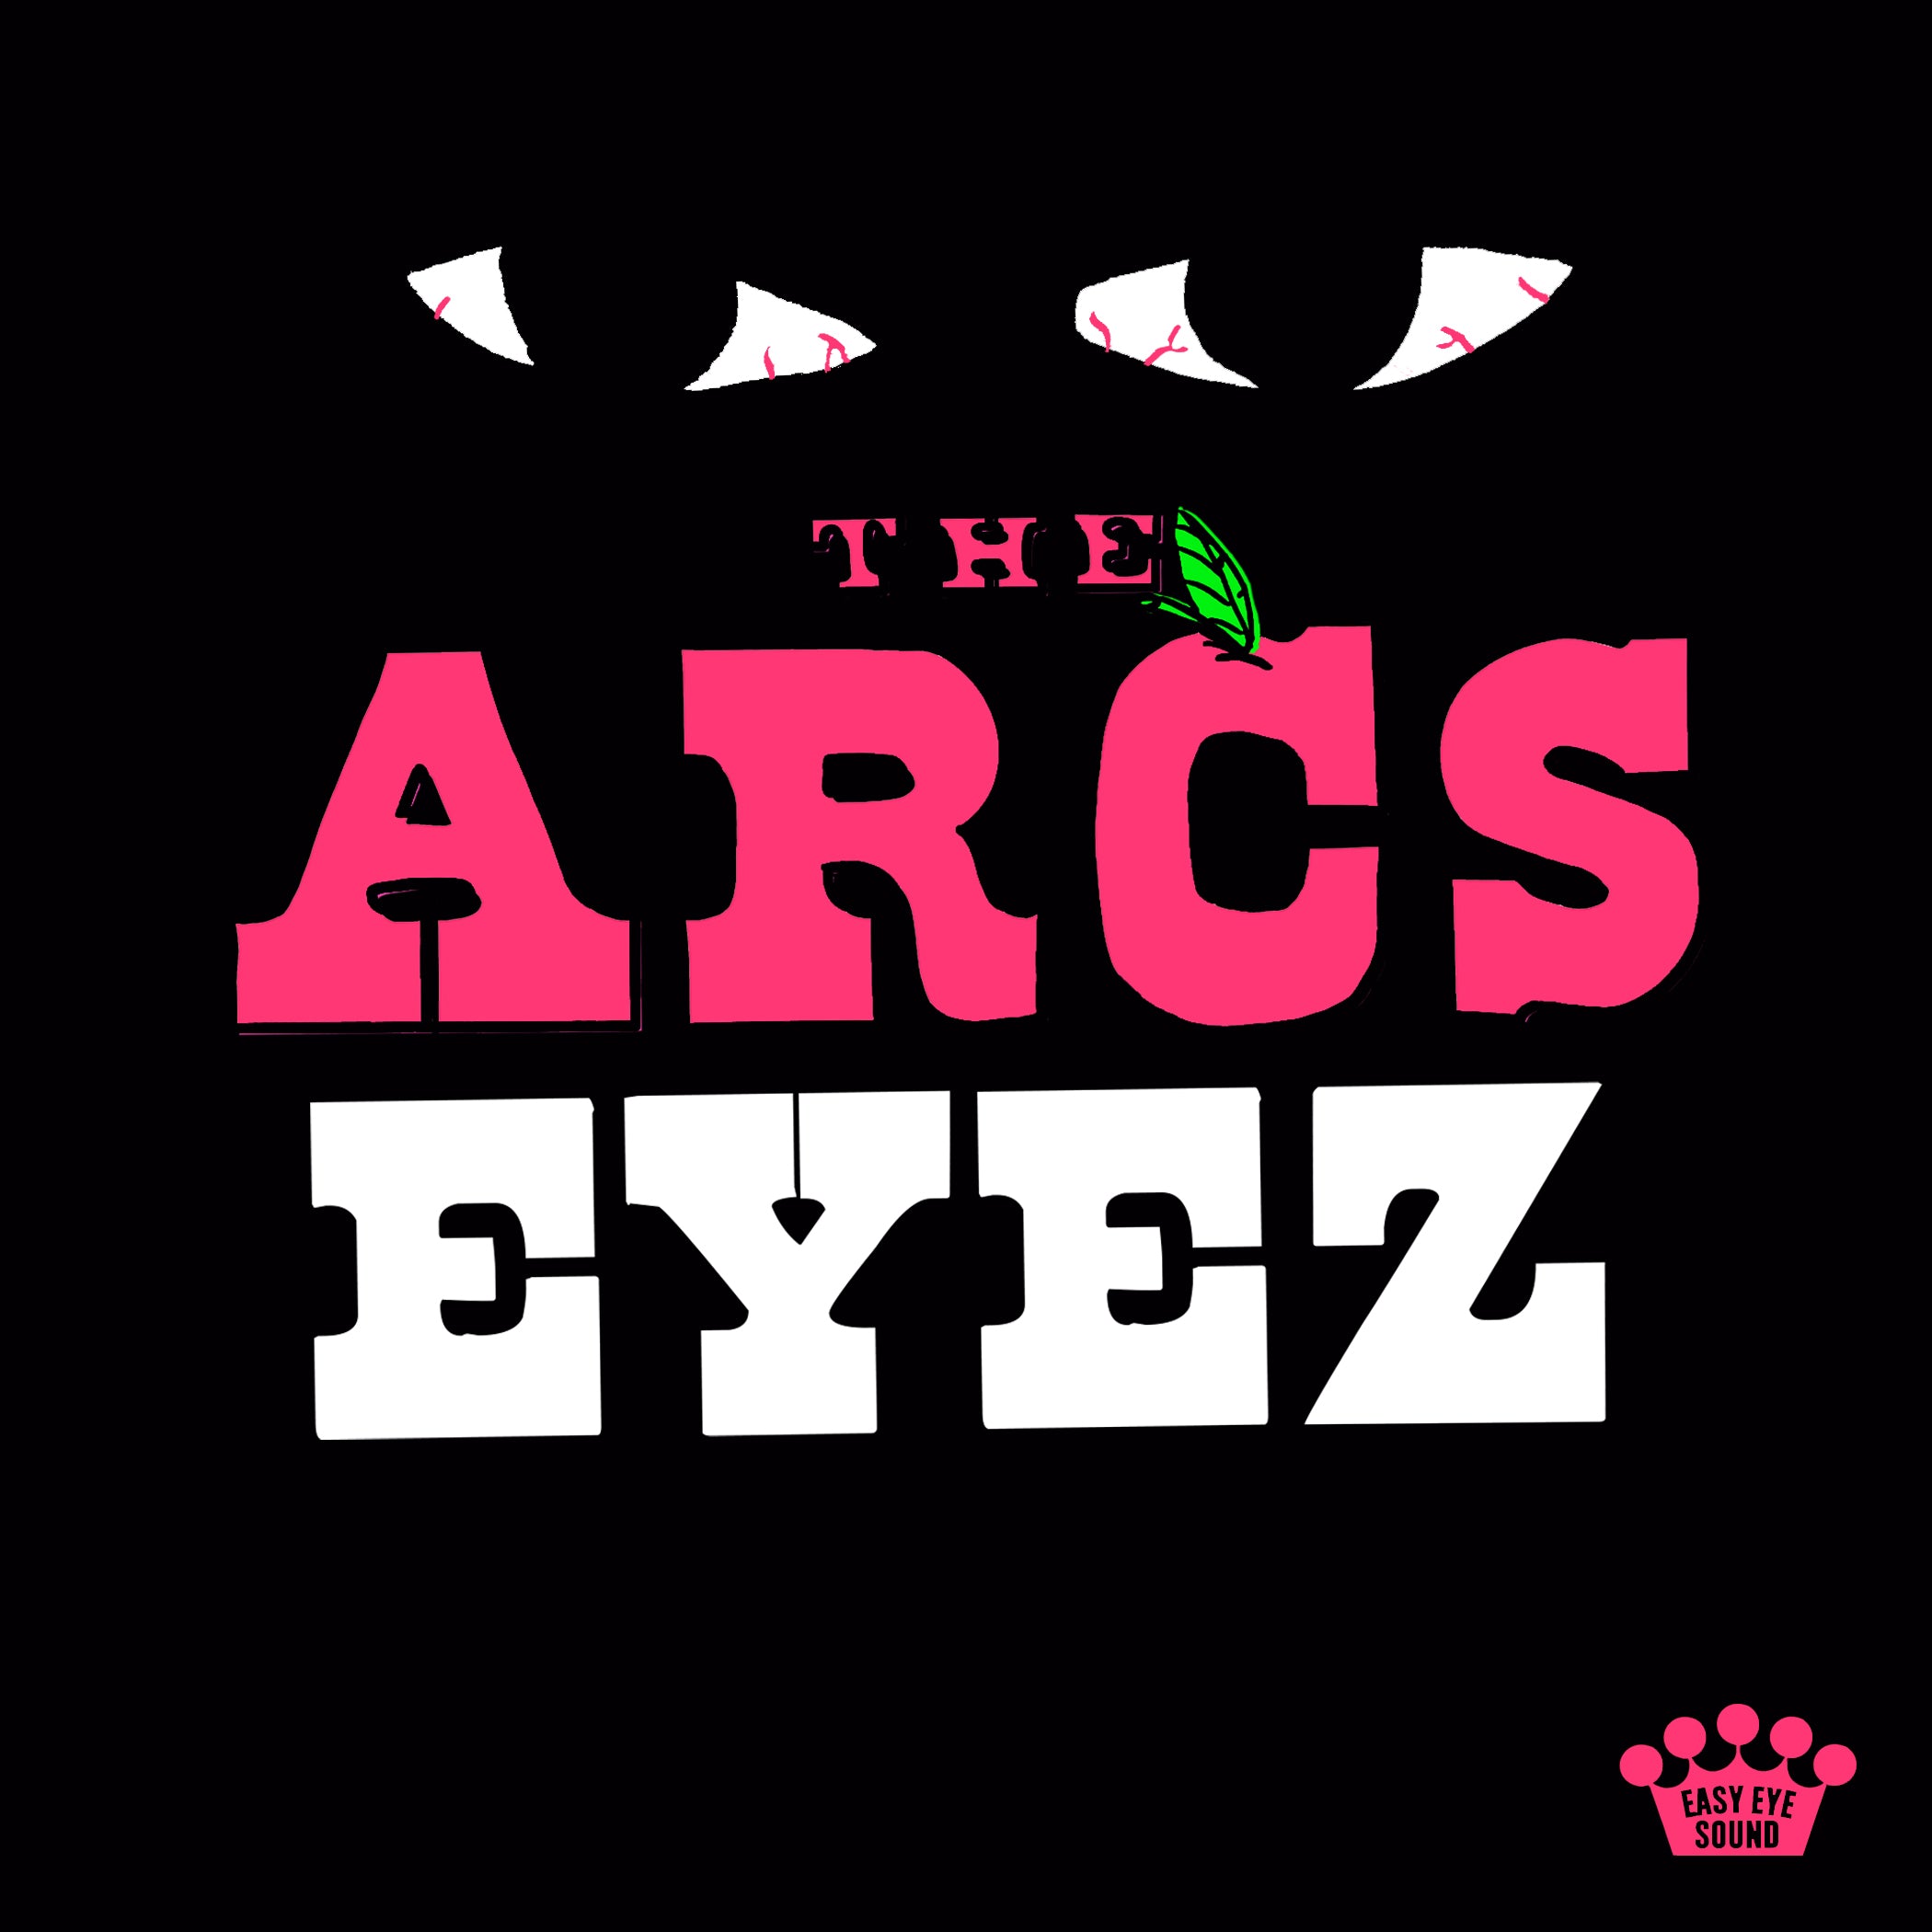 THE ARCS RELEASE ANOTHER LOOK AT THEIR NEW ALBUM WITH “EYEZ”